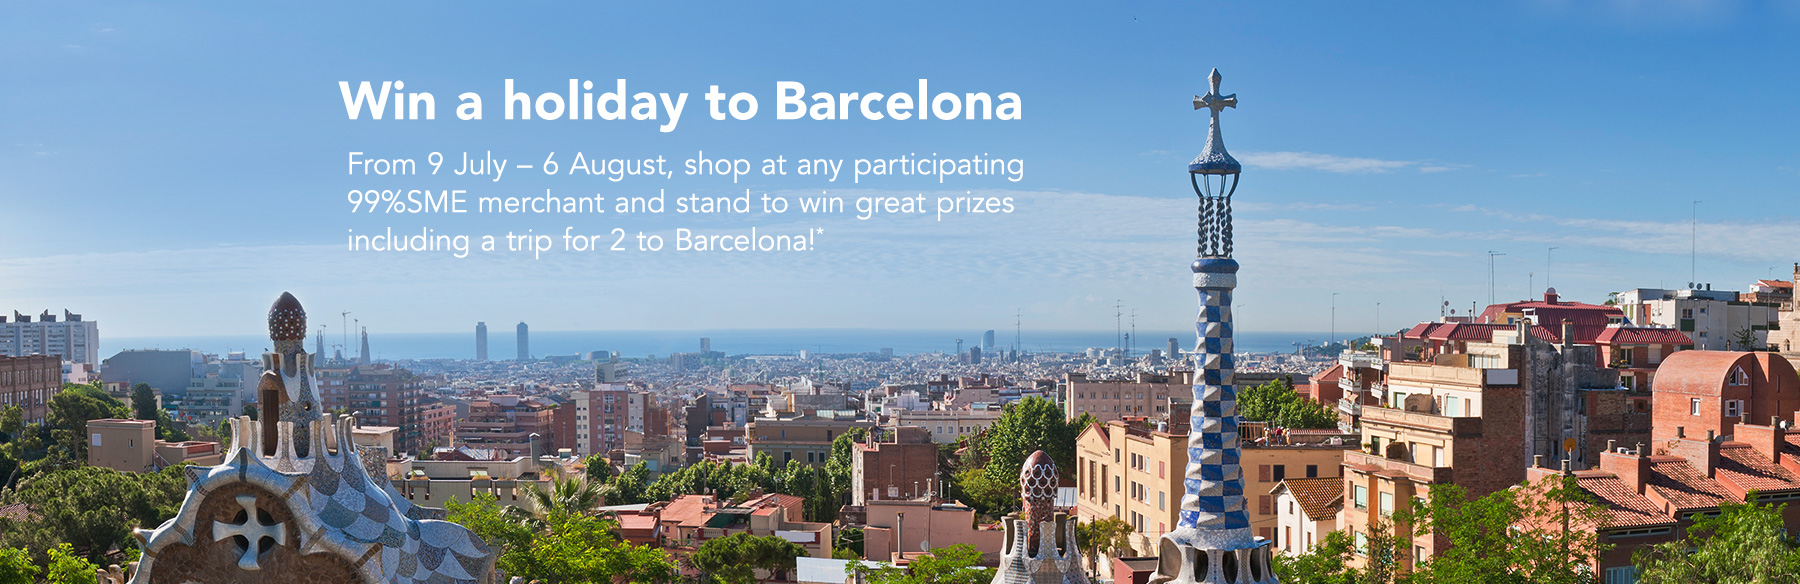 Win a holiday to Barcelona with 99%SME